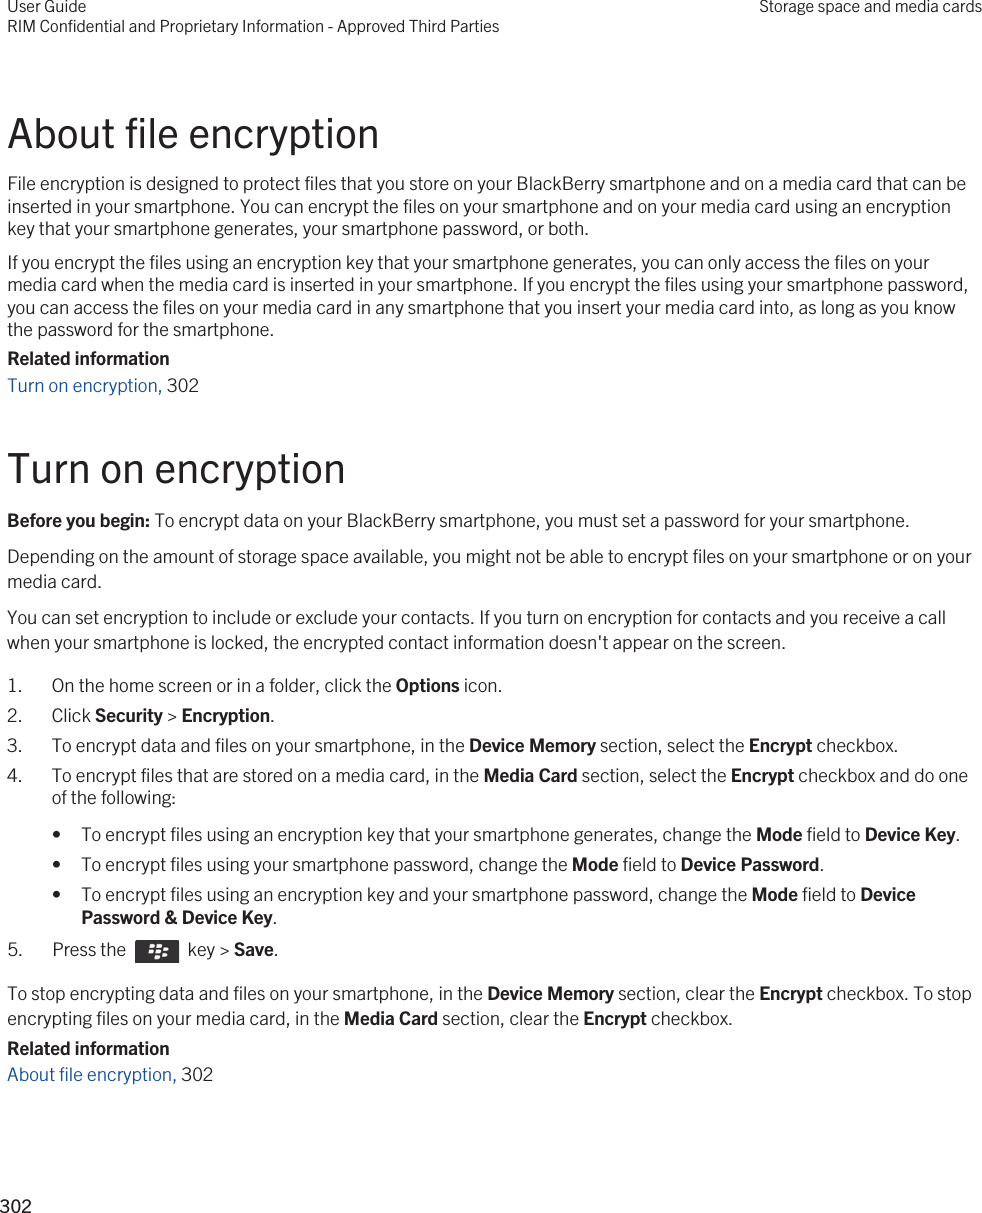 About file encryptionFile encryption is designed to protect files that you store on your BlackBerry smartphone and on a media card that can be inserted in your smartphone. You can encrypt the files on your smartphone and on your media card using an encryption key that your smartphone generates, your smartphone password, or both.If you encrypt the files using an encryption key that your smartphone generates, you can only access the files on your media card when the media card is inserted in your smartphone. If you encrypt the files using your smartphone password, you can access the files on your media card in any smartphone that you insert your media card into, as long as you know the password for the smartphone.Related informationTurn on encryption, 302Turn on encryptionBefore you begin: To encrypt data on your BlackBerry smartphone, you must set a password for your smartphone.Depending on the amount of storage space available, you might not be able to encrypt files on your smartphone or on your media card.You can set encryption to include or exclude your contacts. If you turn on encryption for contacts and you receive a call when your smartphone is locked, the encrypted contact information doesn&apos;t appear on the screen.1. On the home screen or in a folder, click the Options icon.2. Click Security &gt; Encryption.3. To encrypt data and files on your smartphone, in the Device Memory section, select the Encrypt checkbox.4. To encrypt files that are stored on a media card, in the Media Card section, select the Encrypt checkbox and do one of the following:• To encrypt files using an encryption key that your smartphone generates, change the Mode field to Device Key.• To encrypt files using your smartphone password, change the Mode field to Device Password.• To encrypt files using an encryption key and your smartphone password, change the Mode field to Device Password &amp; Device Key.5.  Press the    key &gt; Save. To stop encrypting data and files on your smartphone, in the Device Memory section, clear the Encrypt checkbox. To stop encrypting files on your media card, in the Media Card section, clear the Encrypt checkbox.Related informationAbout file encryption, 302 User GuideRIM Confidential and Proprietary Information - Approved Third PartiesStorage space and media cards302 